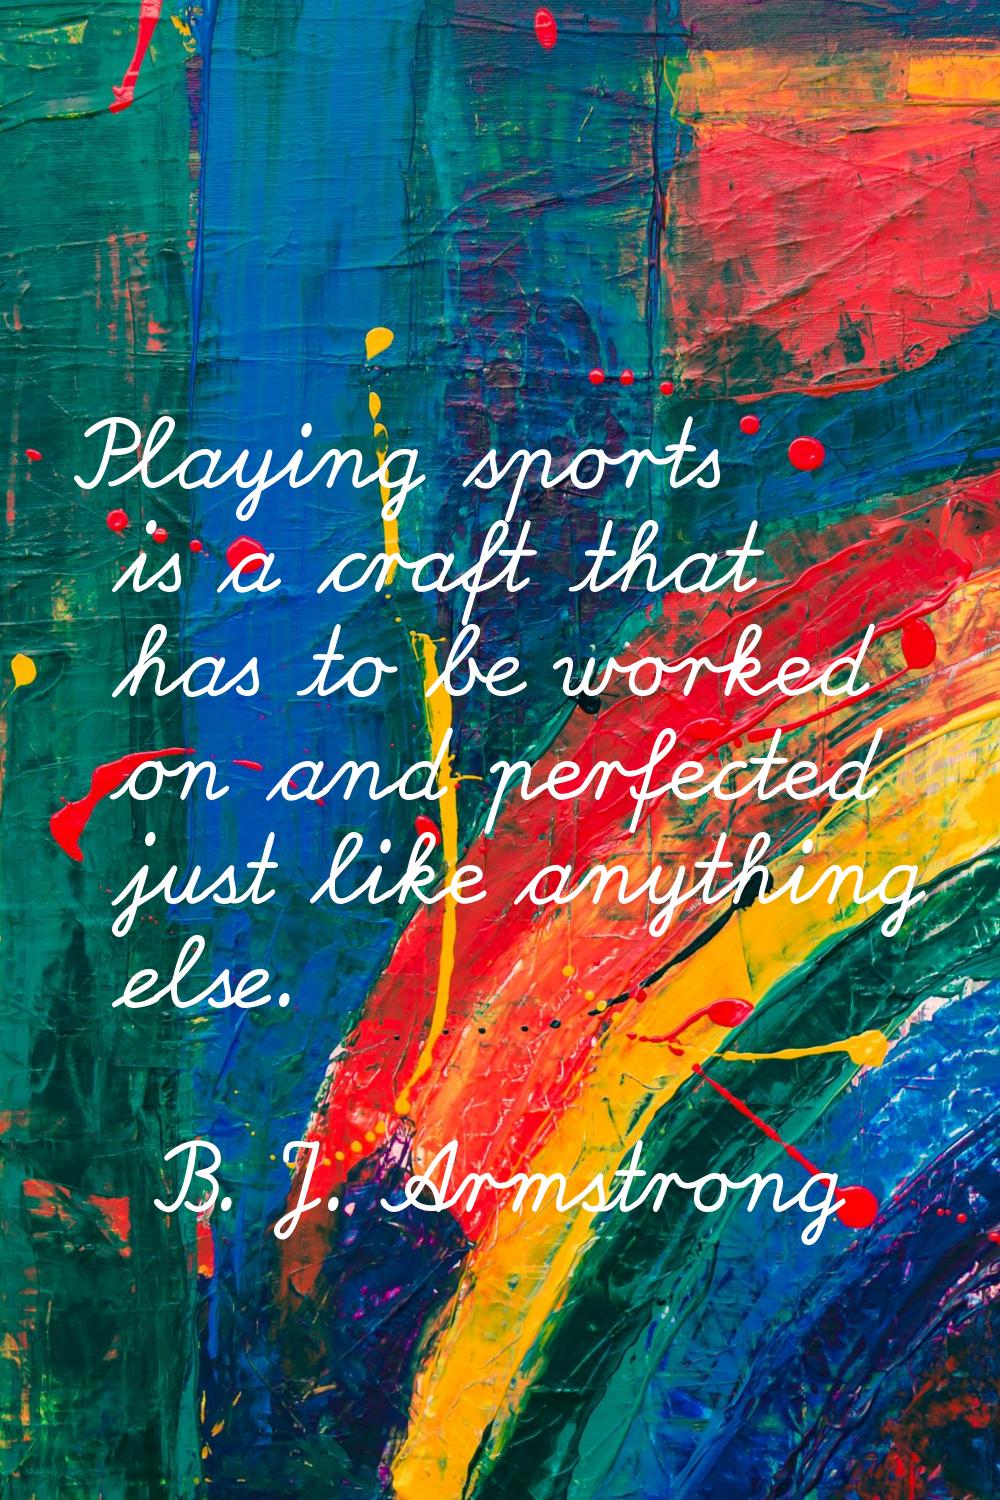 Playing sports is a craft that has to be worked on and perfected just like anything else.